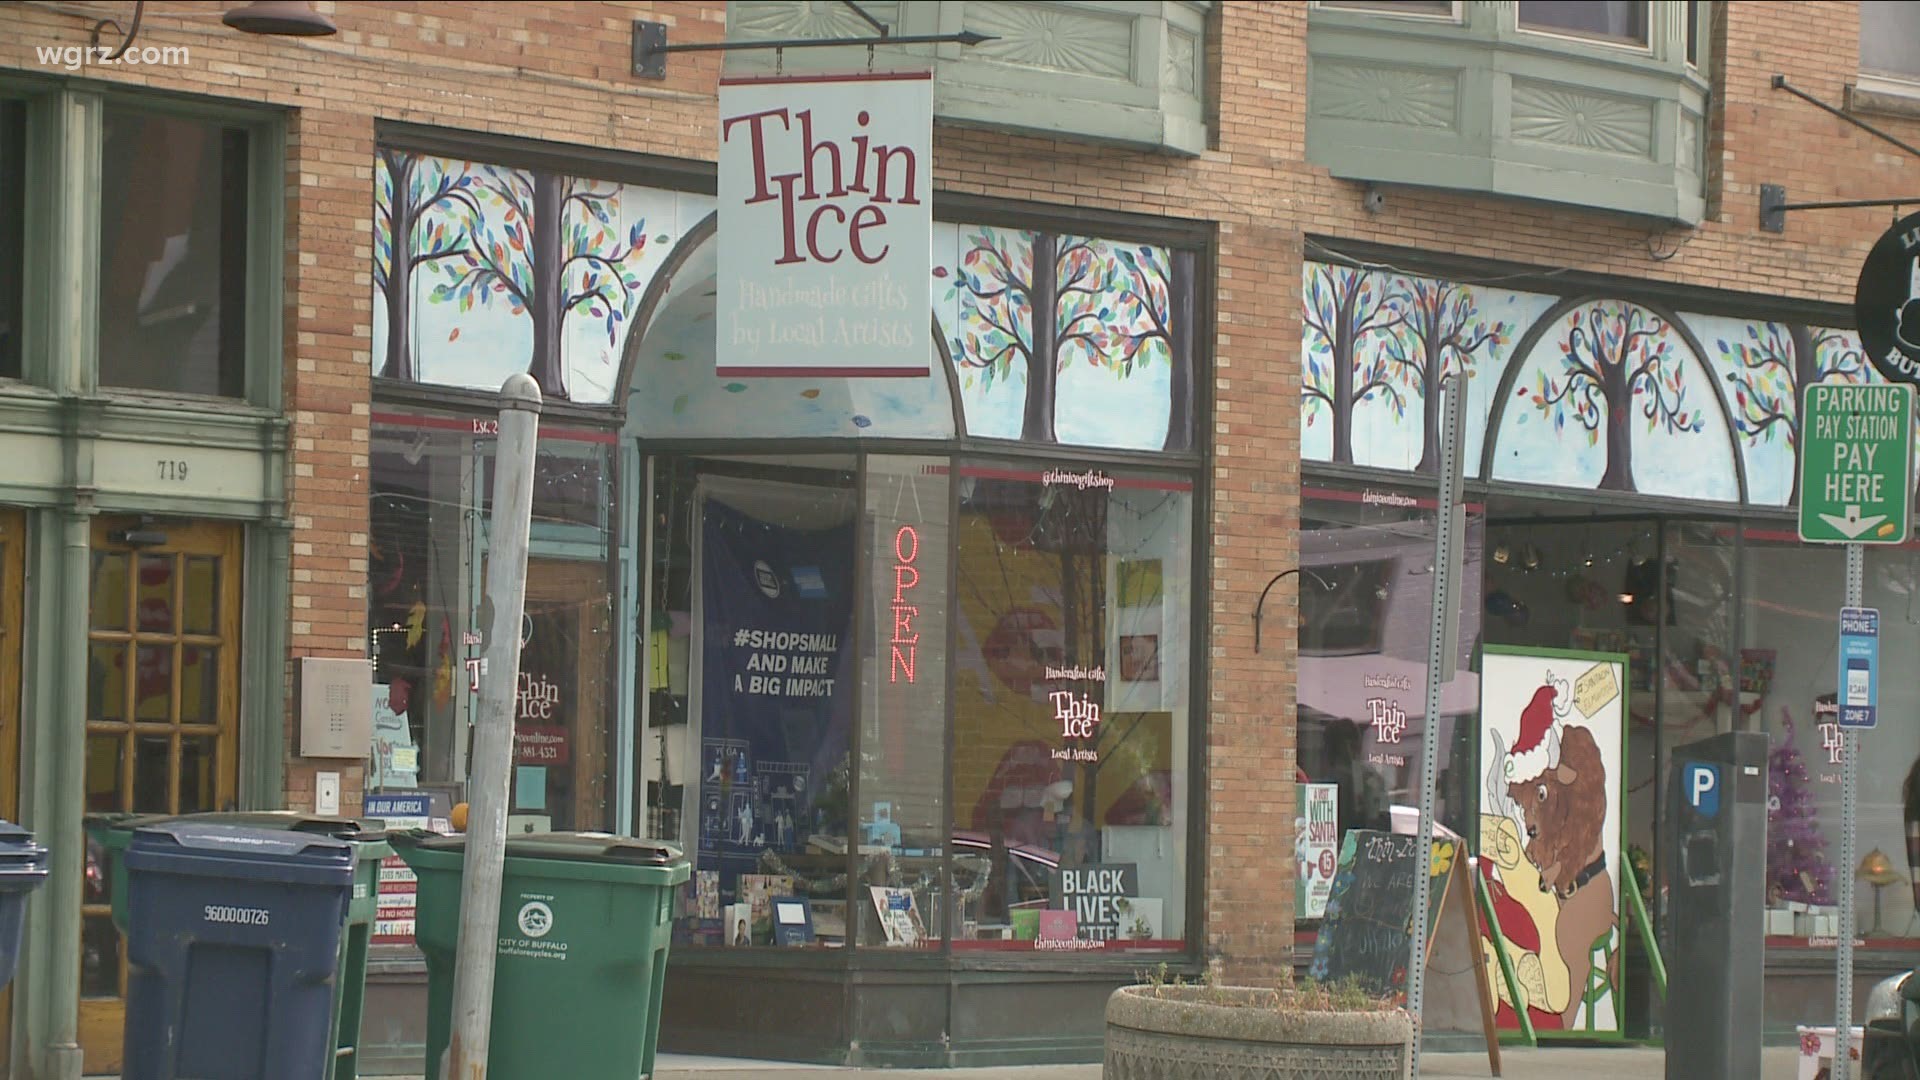 Santa will be in the window at Thin Ice, located at 719 Elmwood Avenue in Buffalo, from noon to 4 p.m.